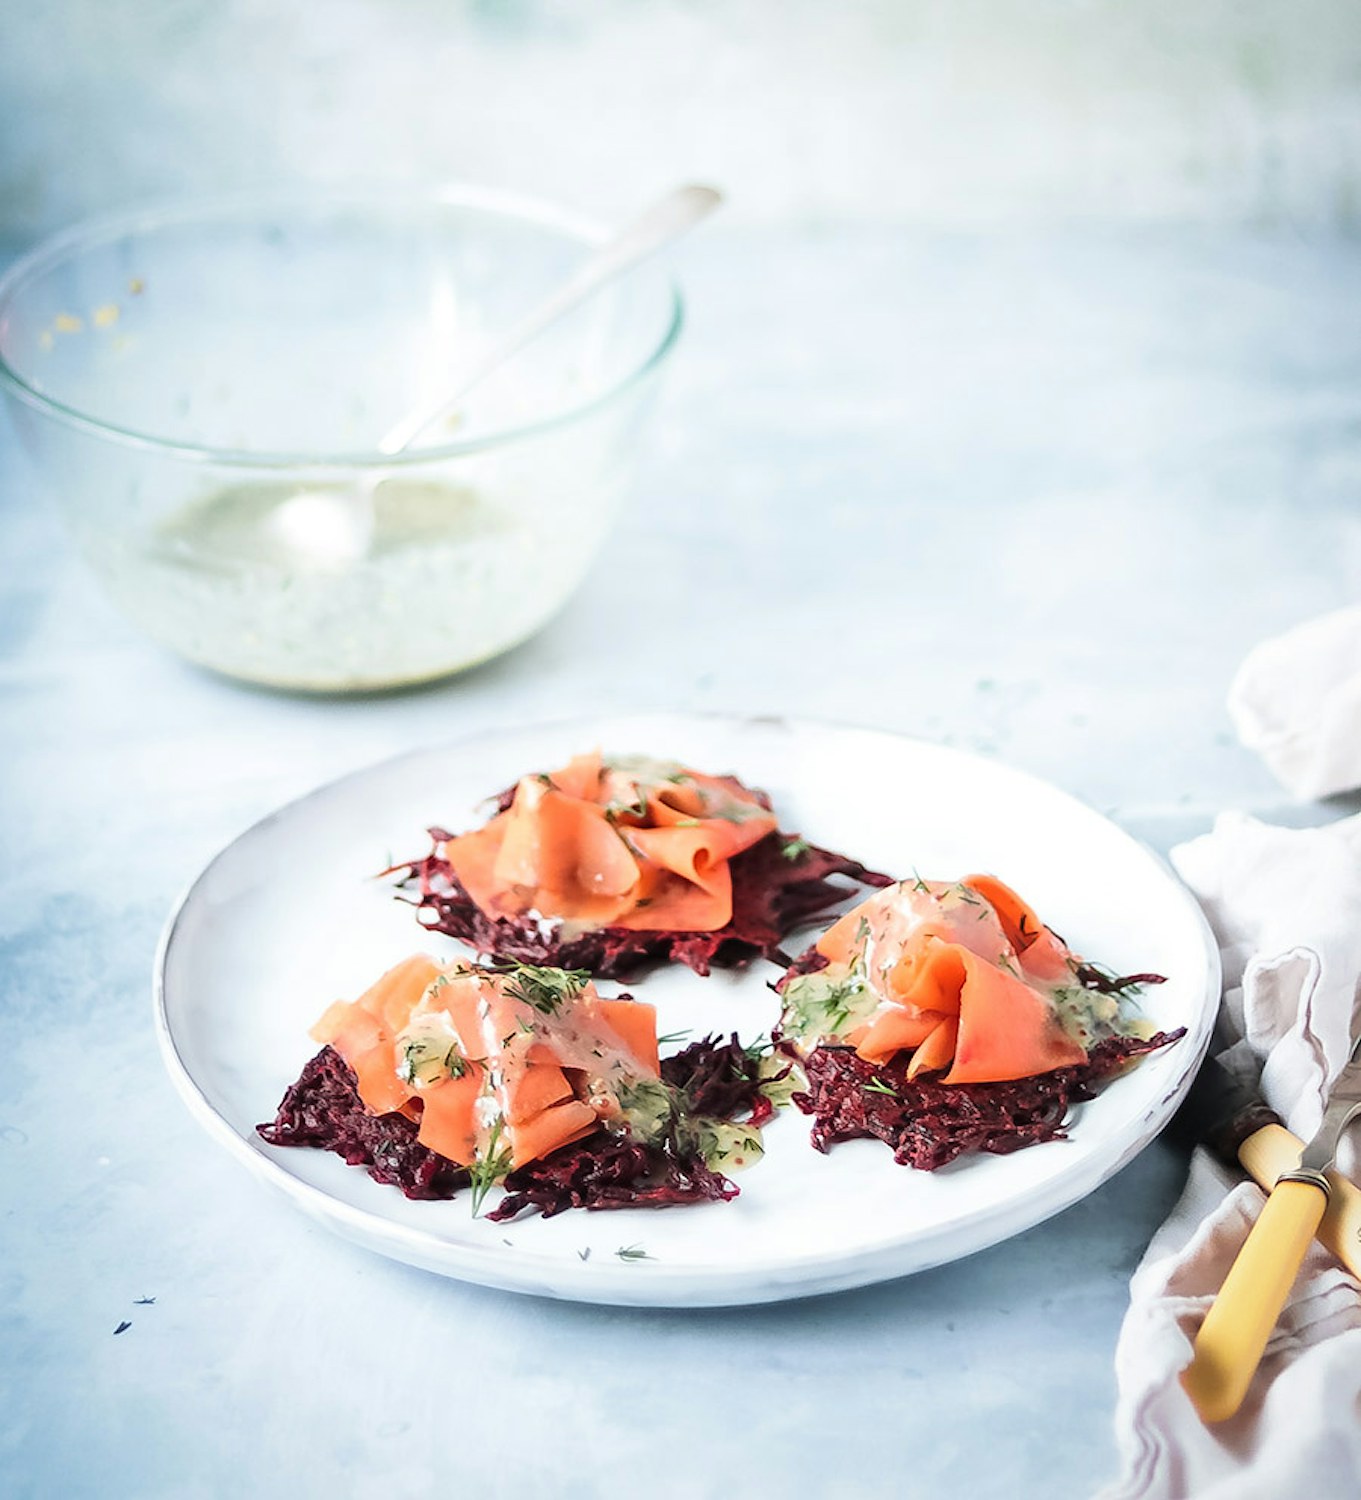 Beetroot Fritters and 'Gravlax'